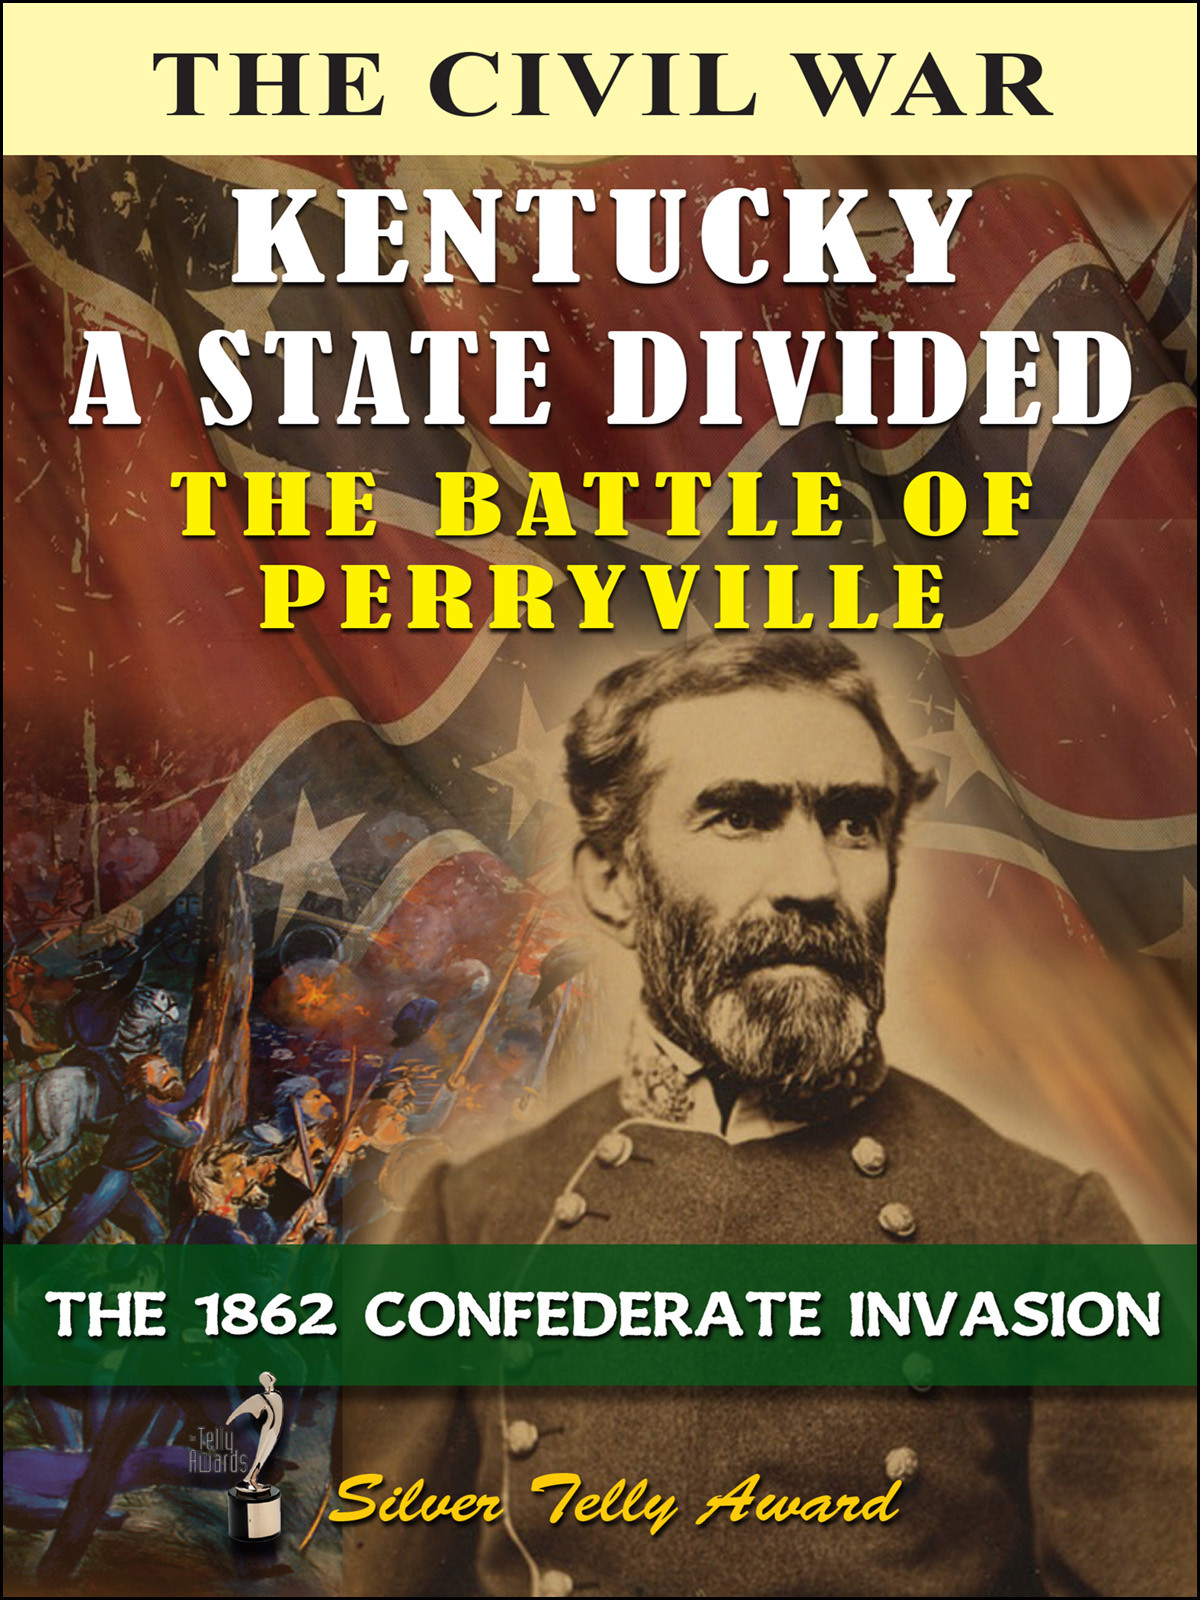 L4838 - Kentucky a State Divided The Battle of Perryville